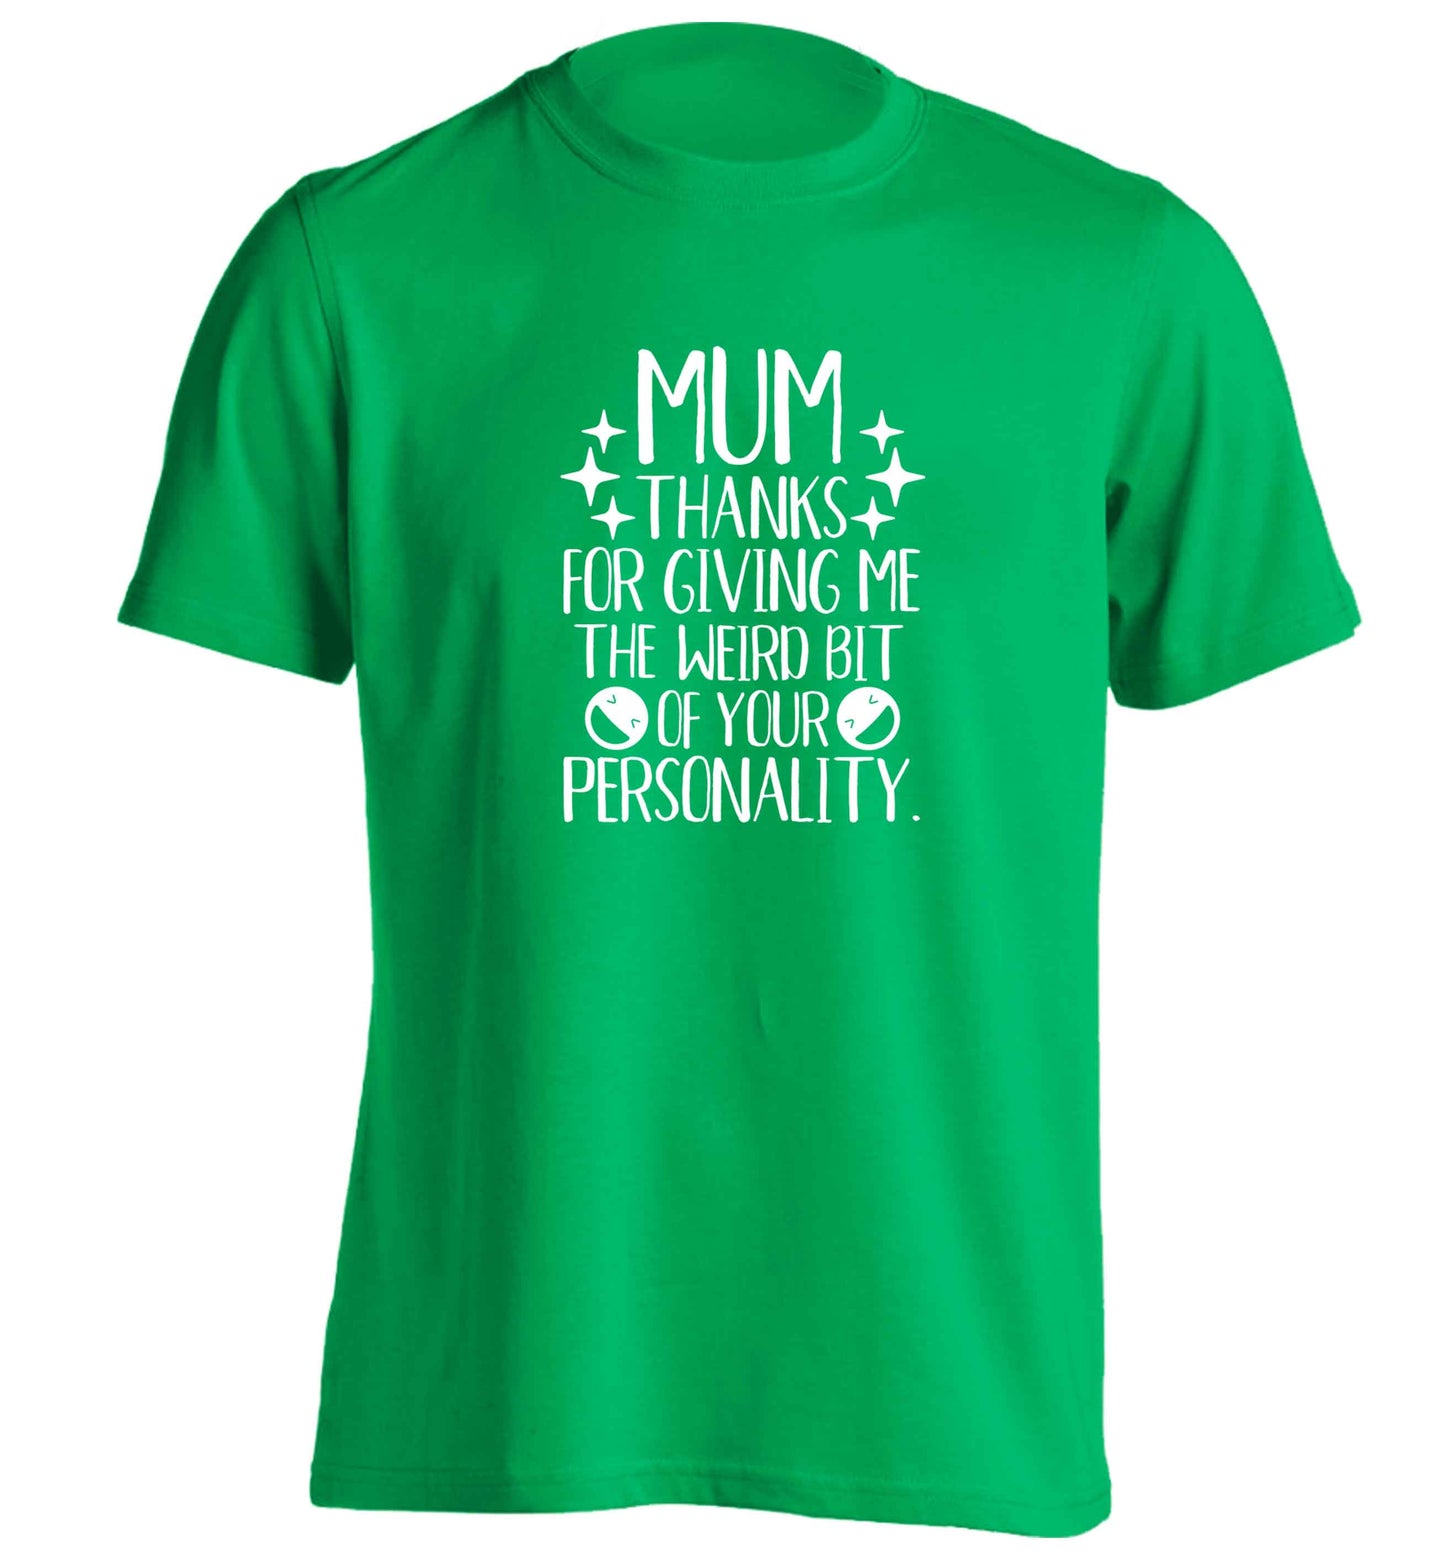 Mum, I love you more than halloumi and if you know me at all you know how deep that is adults unisex green Tshirt 2XL